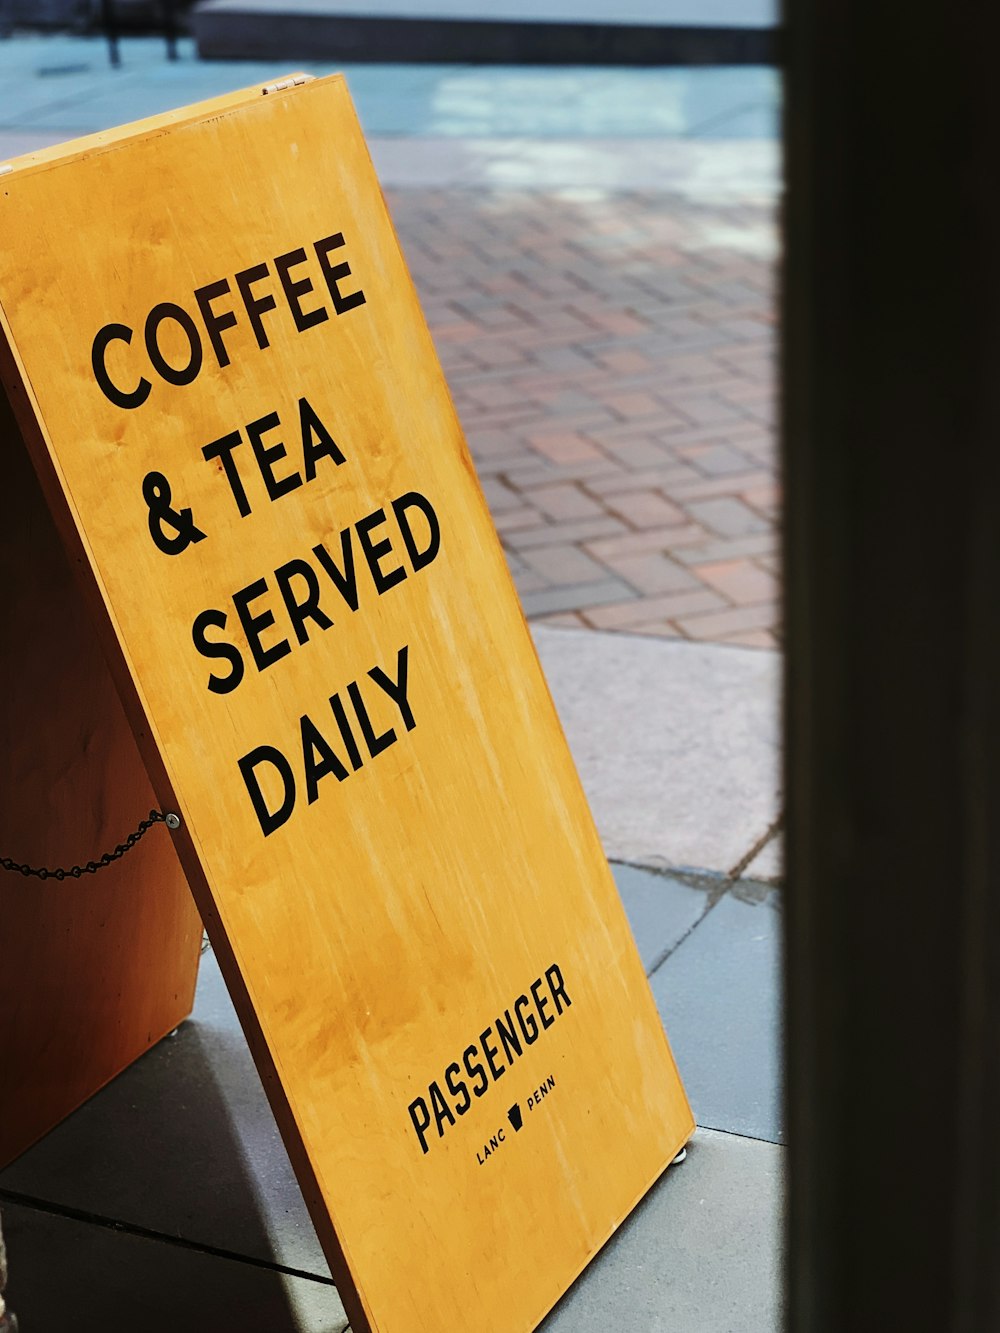 Coffee & Tea Served Daily signage